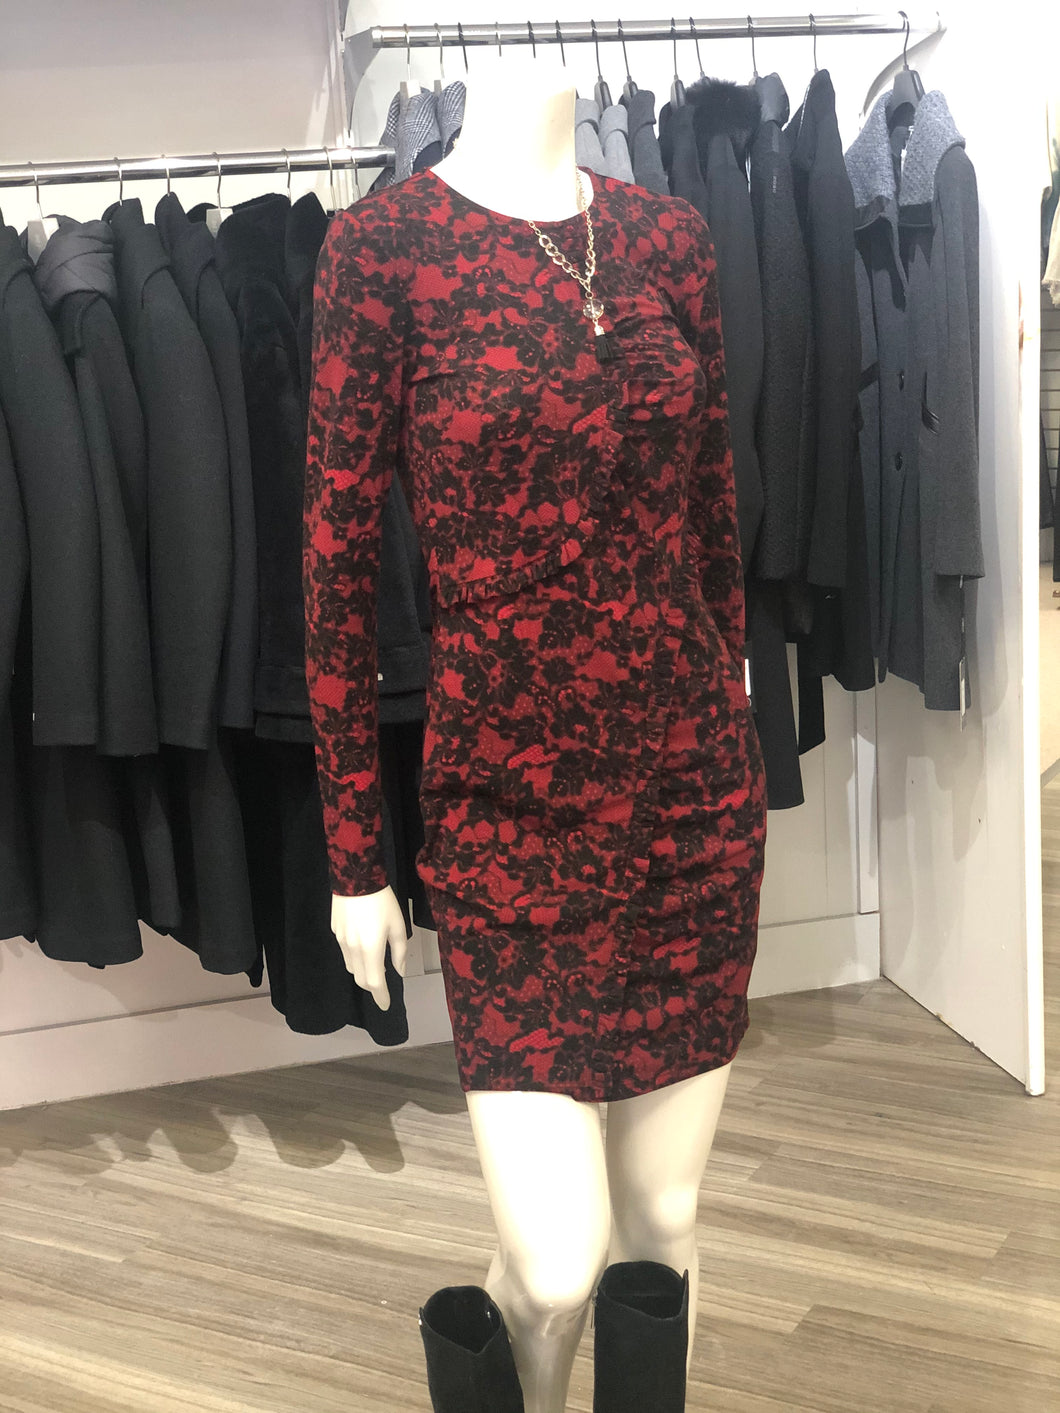 Michael Kors red/black lace print dress with ruffle edge detailing - 8000072786